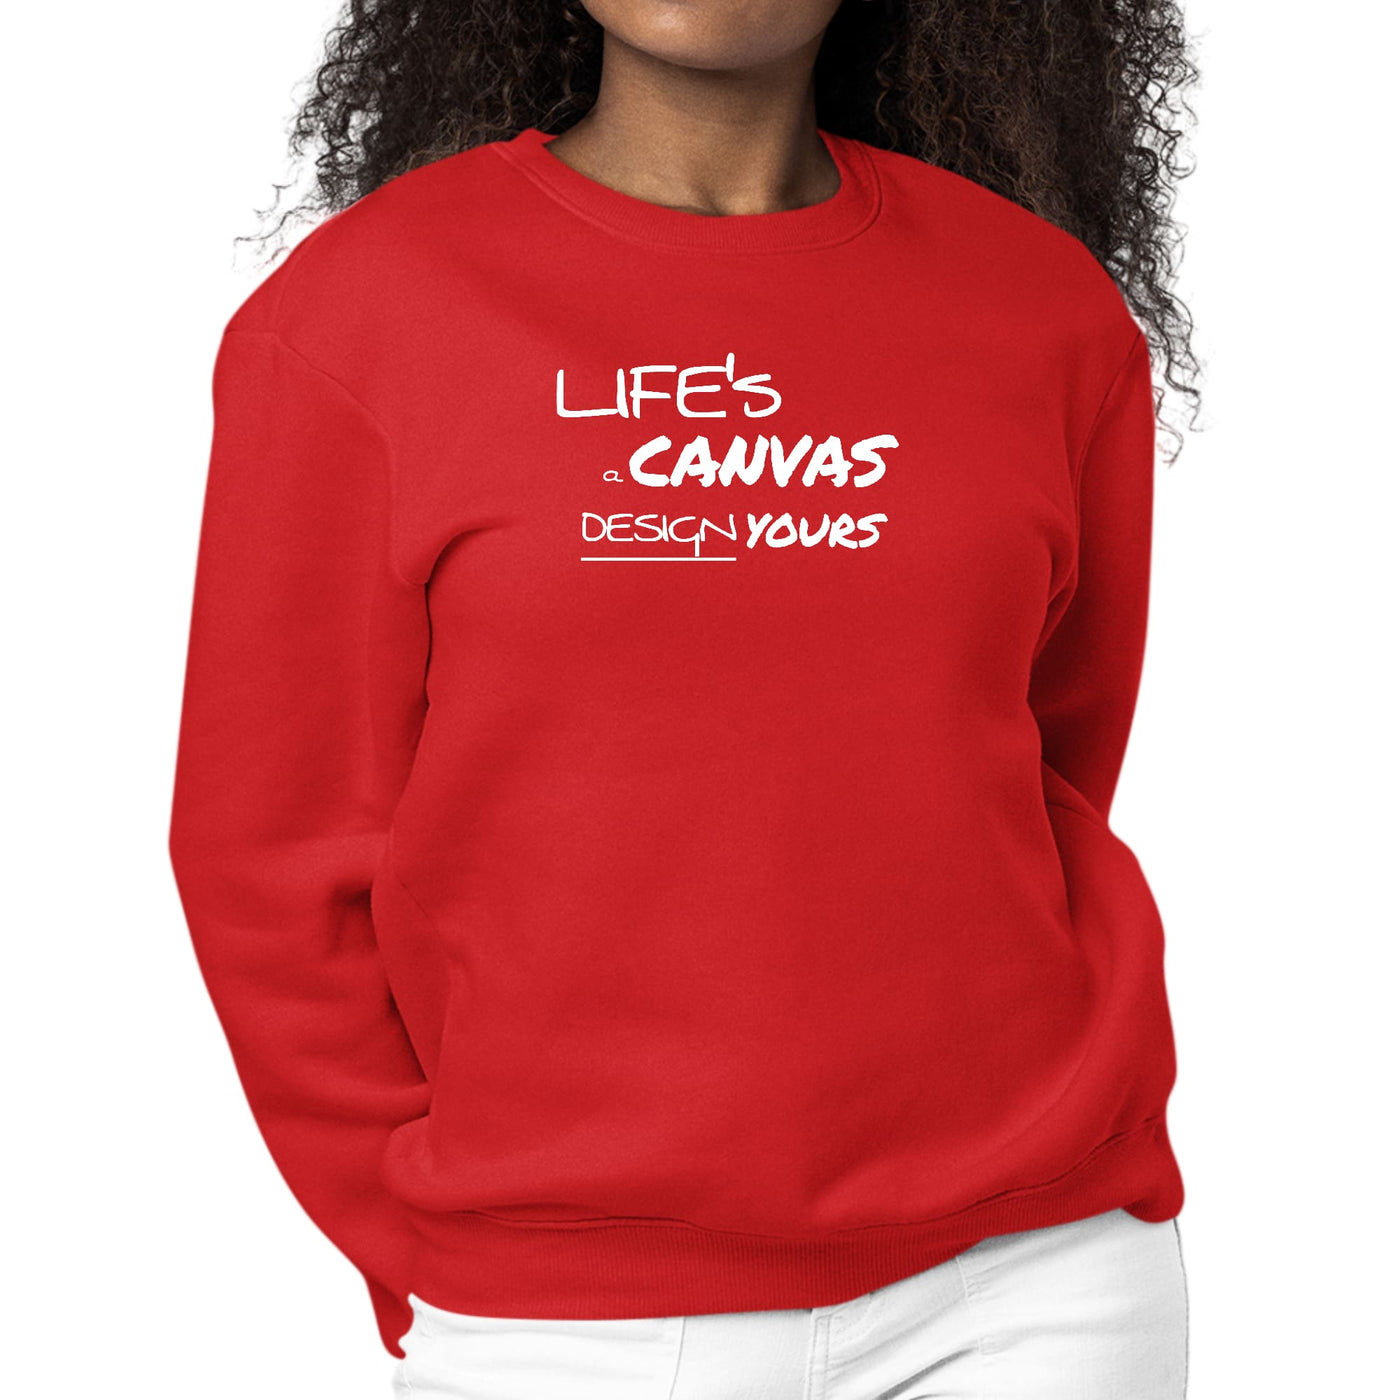 Womens Graphic Sweatshirt Life’s a Canvas Design Yours Motivational